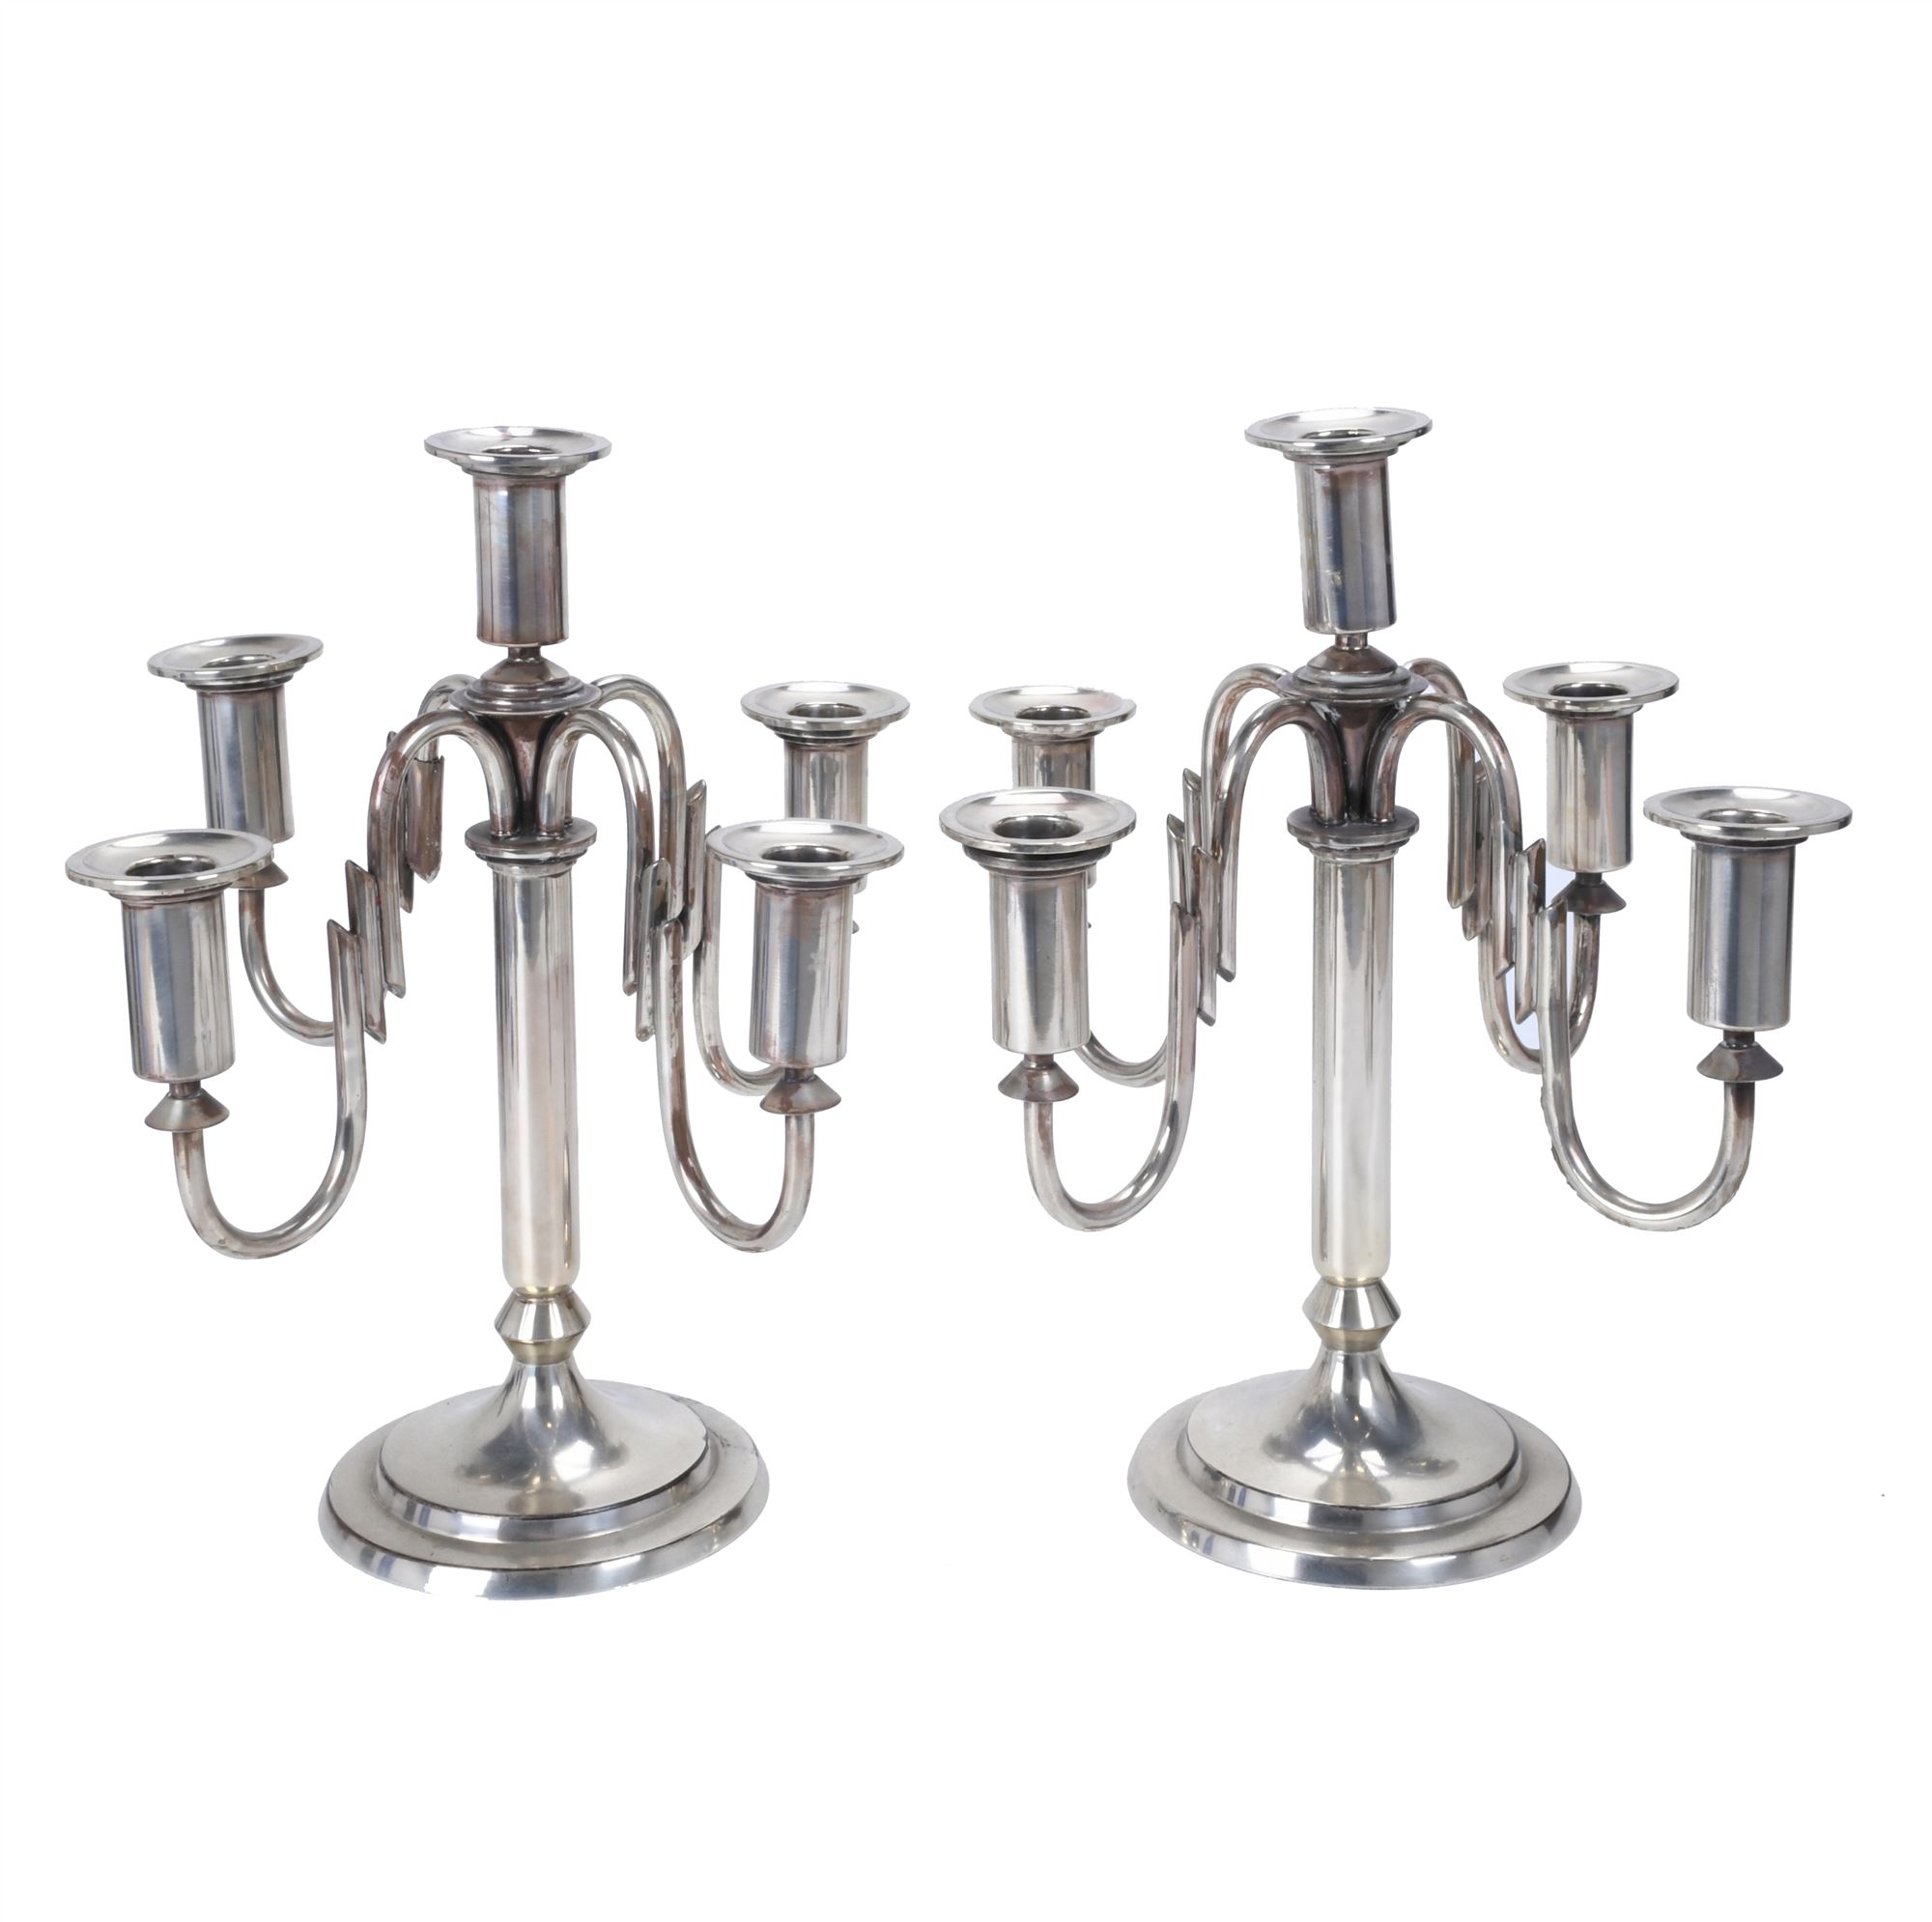 PAIR OF ART DECO STYLE CANDELABRA IN SILVER, MID 20TH CENTU